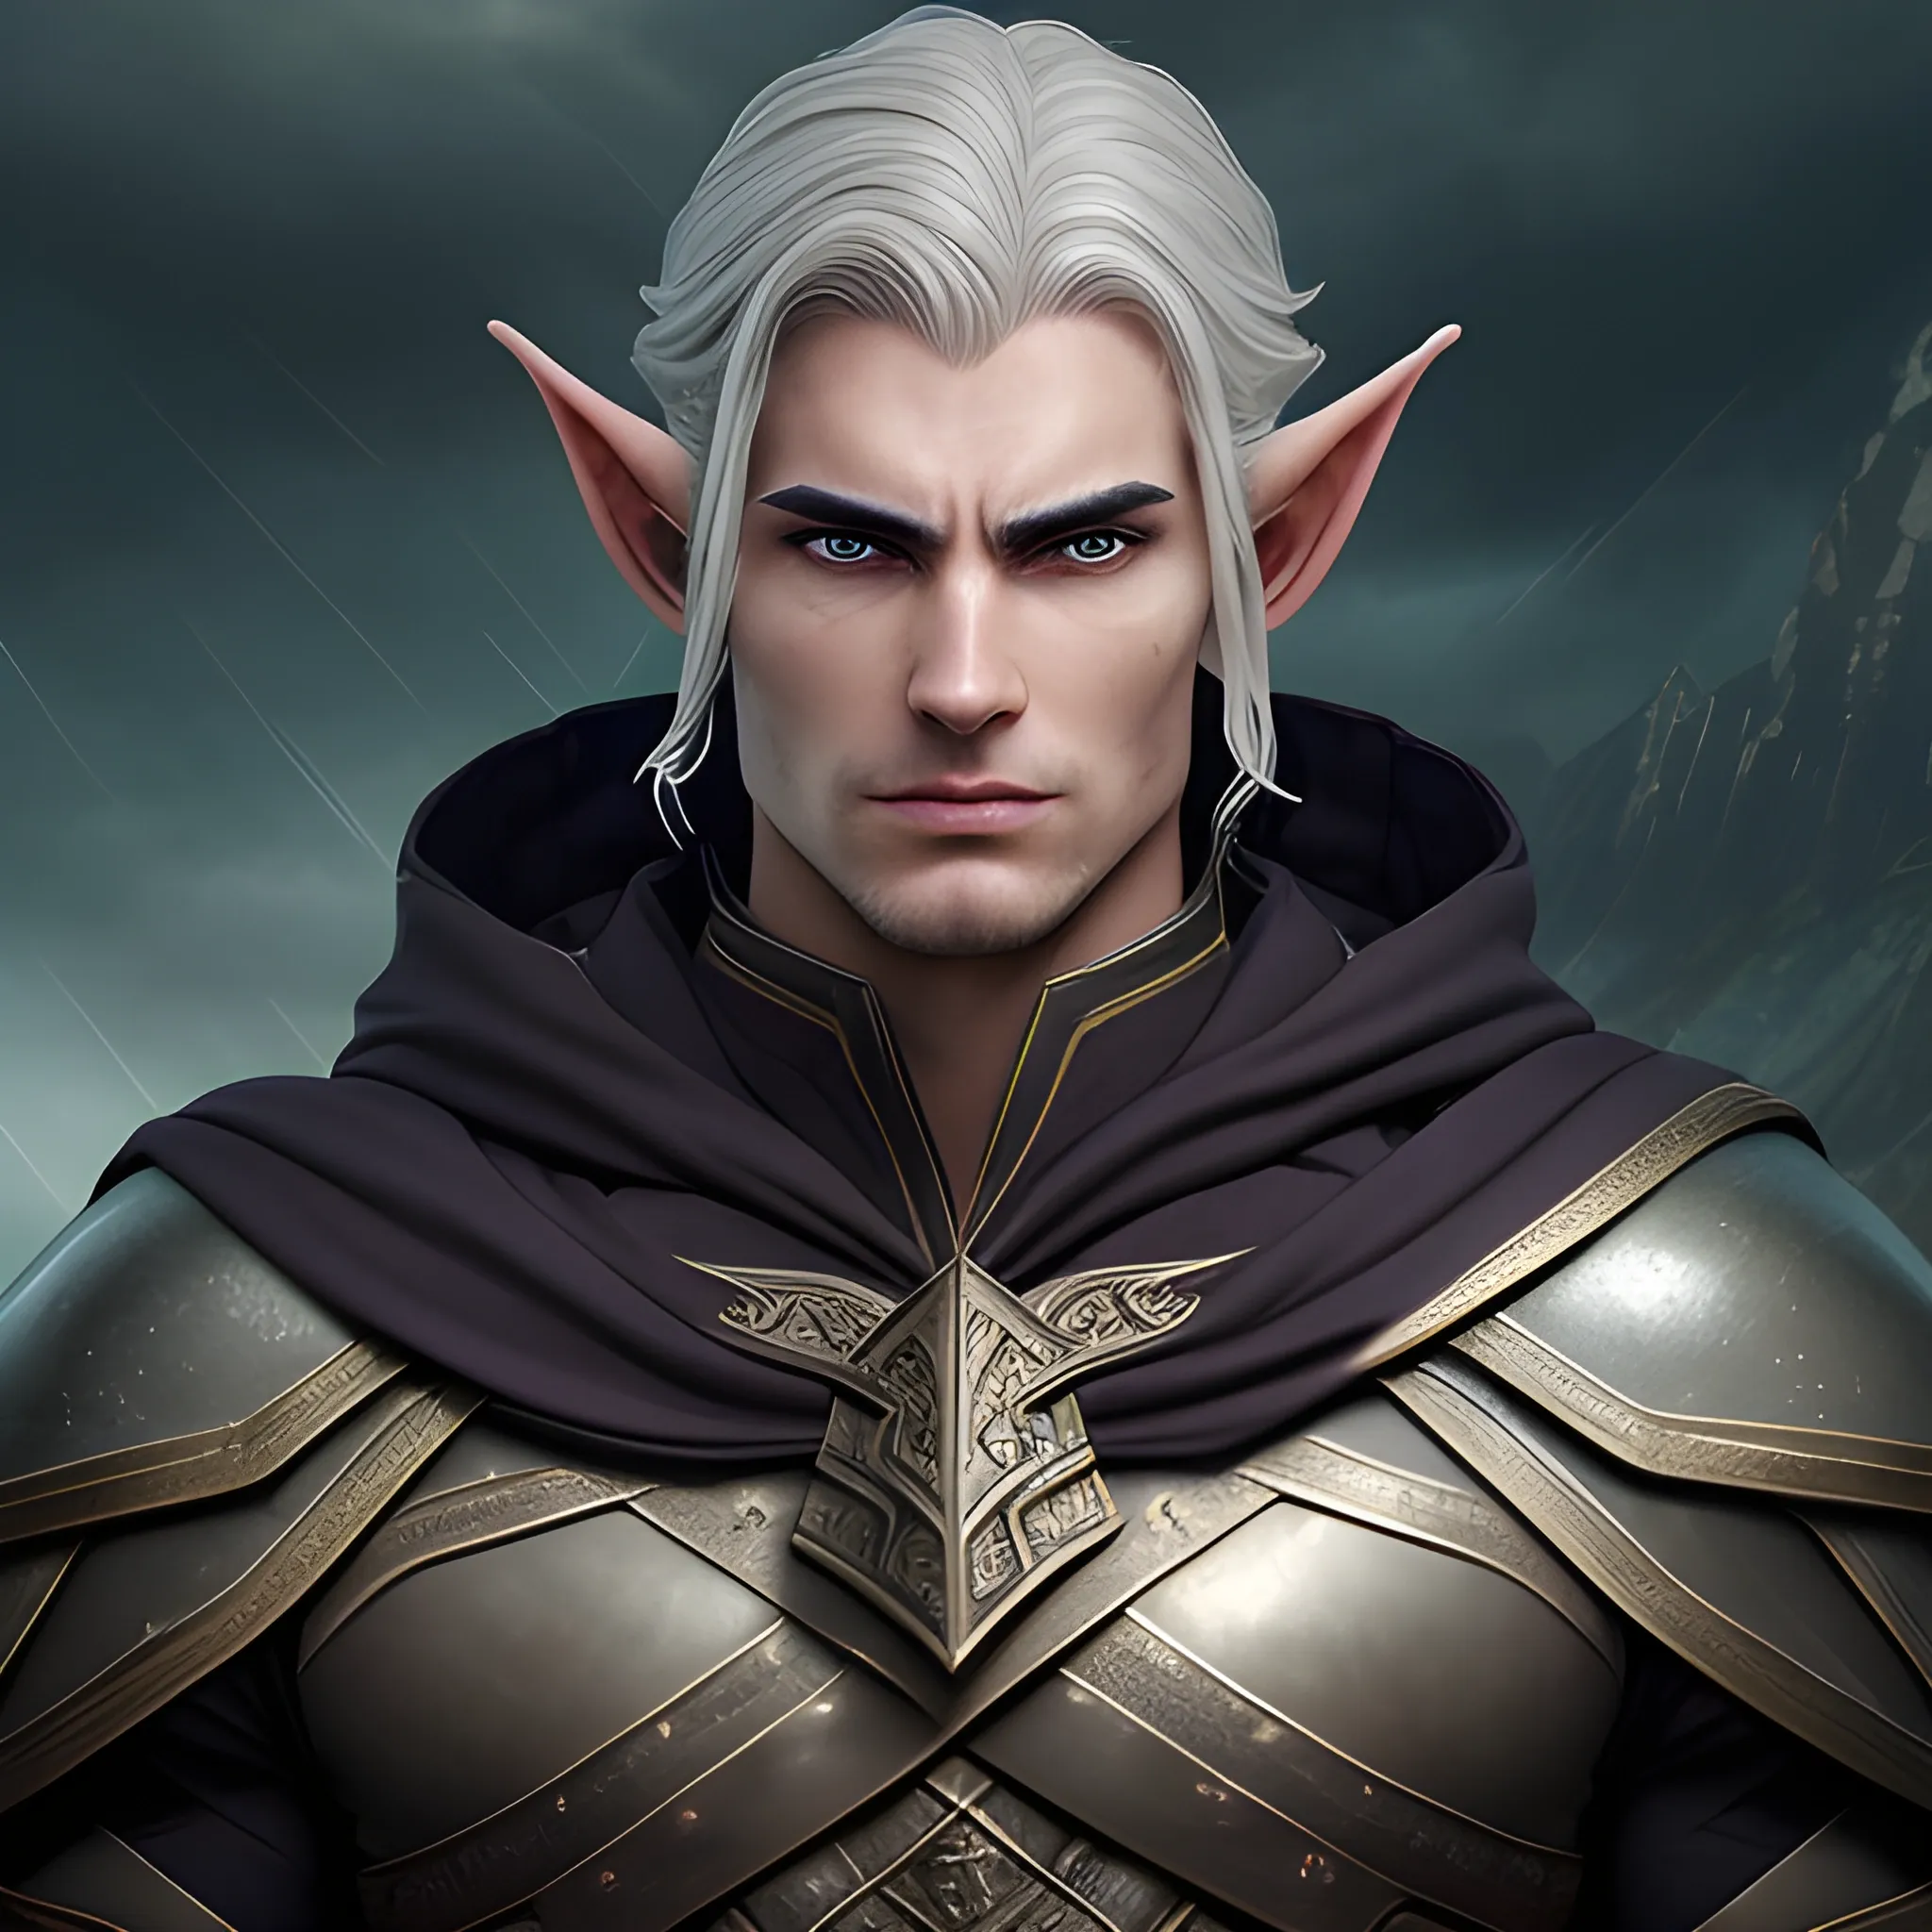 Kaelen Stormrider possesses a commanding presence, enhanced by his unique combination of elven and human features. Standing at a moderate height, he exudes an air of confidence and strength. His physical appearance reflects his diverse heritage, incorporating the elegance of the elves and the resilience of humans.

Kaelen's facial features are a harmonious blend of refined elven beauty and rugged human strength. His face is framed by dark, wavy hair that falls to his shoulders, accentuating his sharp cheekbones and a strong jawline. His fair skin, tinged with a hint of warmth, highlights the intensity of his piercing eyes.

His eyes, a vibrant shade of sapphire blue, are often described as windows to his soul. They emanate an aura of determination and unwavering focus, reflecting the celestial energies that course through his veins. They are framed by well-defined eyebrows, adding a touch of intensity to his gaze.

Kaelen's physique is lean yet muscular, a testament to his physical prowess and the rigorous training he has undergone. He carries himself with a confident posture, exhibiting a natural grace that hints at his elven heritage. His movements are fluid and precise, a reflection of the martial discipline he has cultivated.

Draped upon his broad shoulders, Kaelen often wears a cloak of deep blue, adorned with intricate silver trimmings that depict celestial motifs. The cloak billows behind him, evoking an image of a storm on the horizon, as if he is a harbinger of both power and tranquility. His attire consists of practical yet finely crafted garments that allow for ease of movement during combat, blending elements of elven elegance and practical human design.

Kaelen's presence is both captivating and enigmatic, drawing the attention of those around him. With his elven grace, human strength, and a gaze that holds the weight of determination, he stands as a formidable figure, ready to face the challenges that lie ahead on Lumina Isle.

4K, hyper realistic